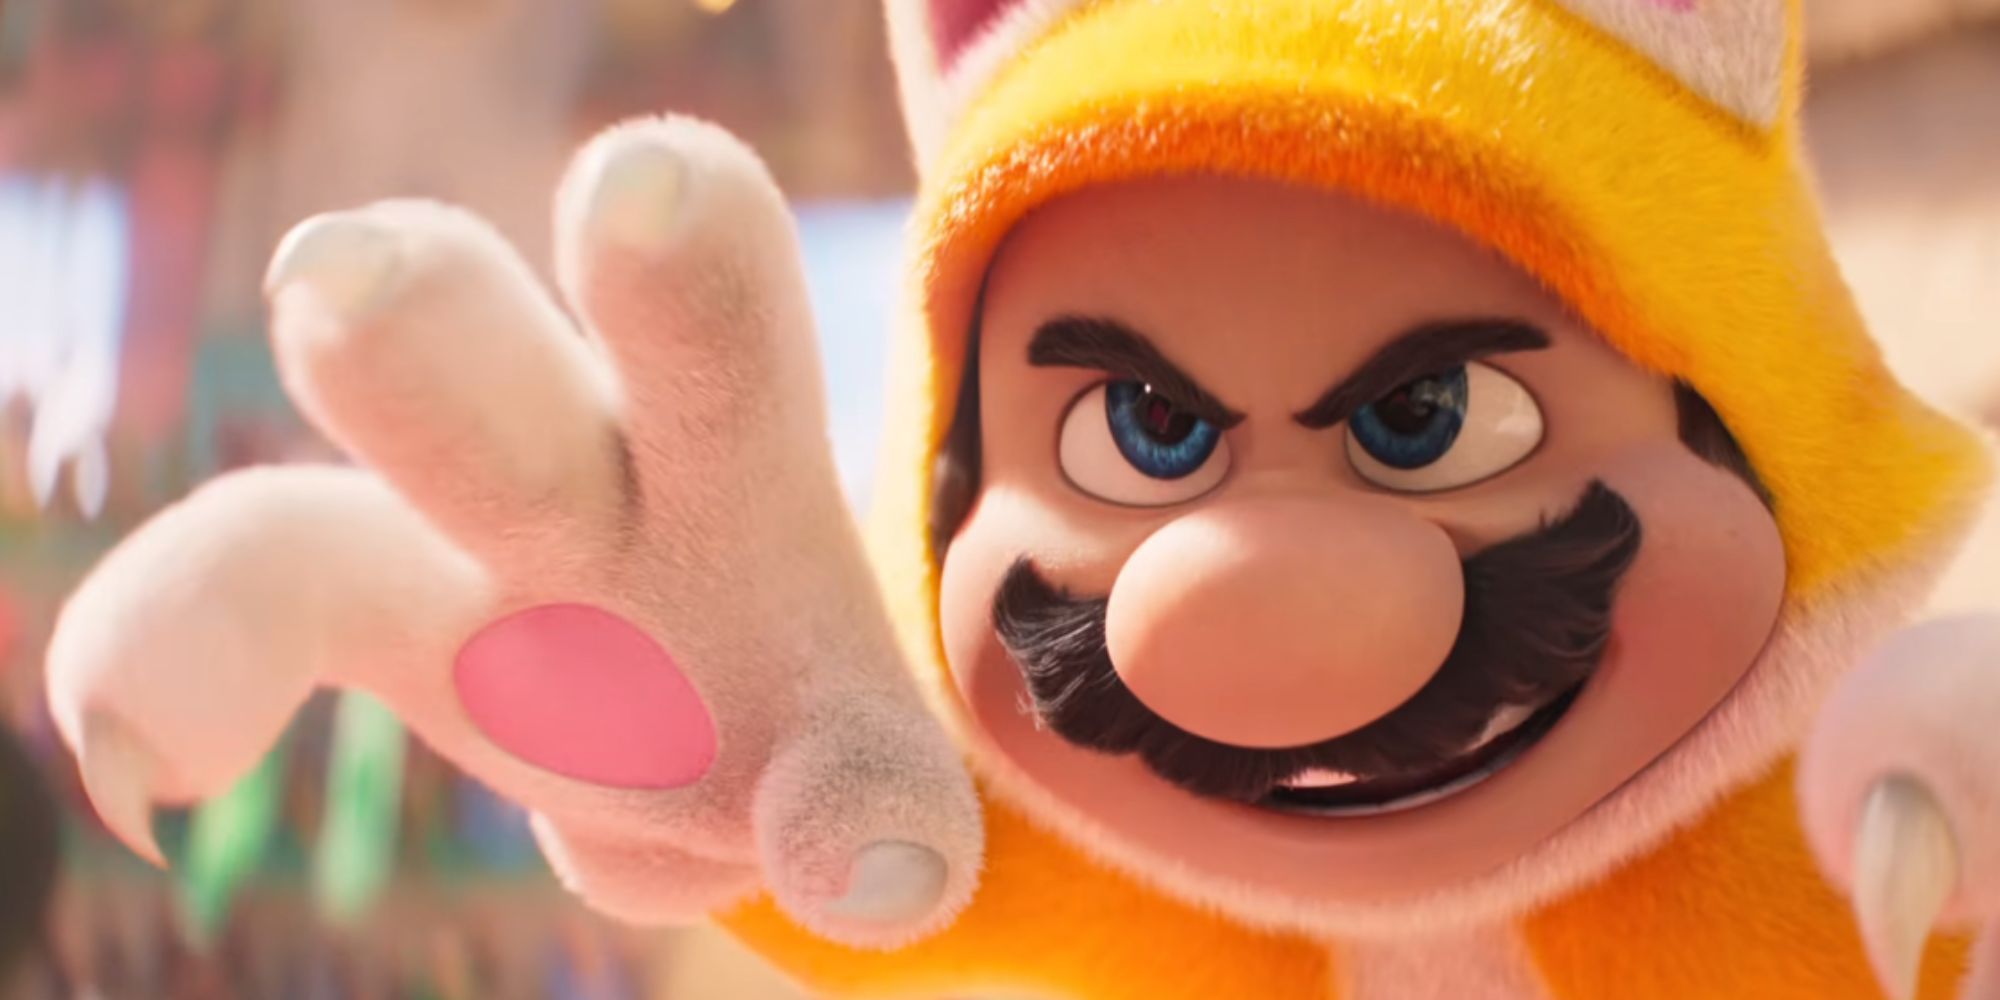 Super Mario Bros. Movie Breaks Frozen 2’s Box Office Records On Opening Weekend